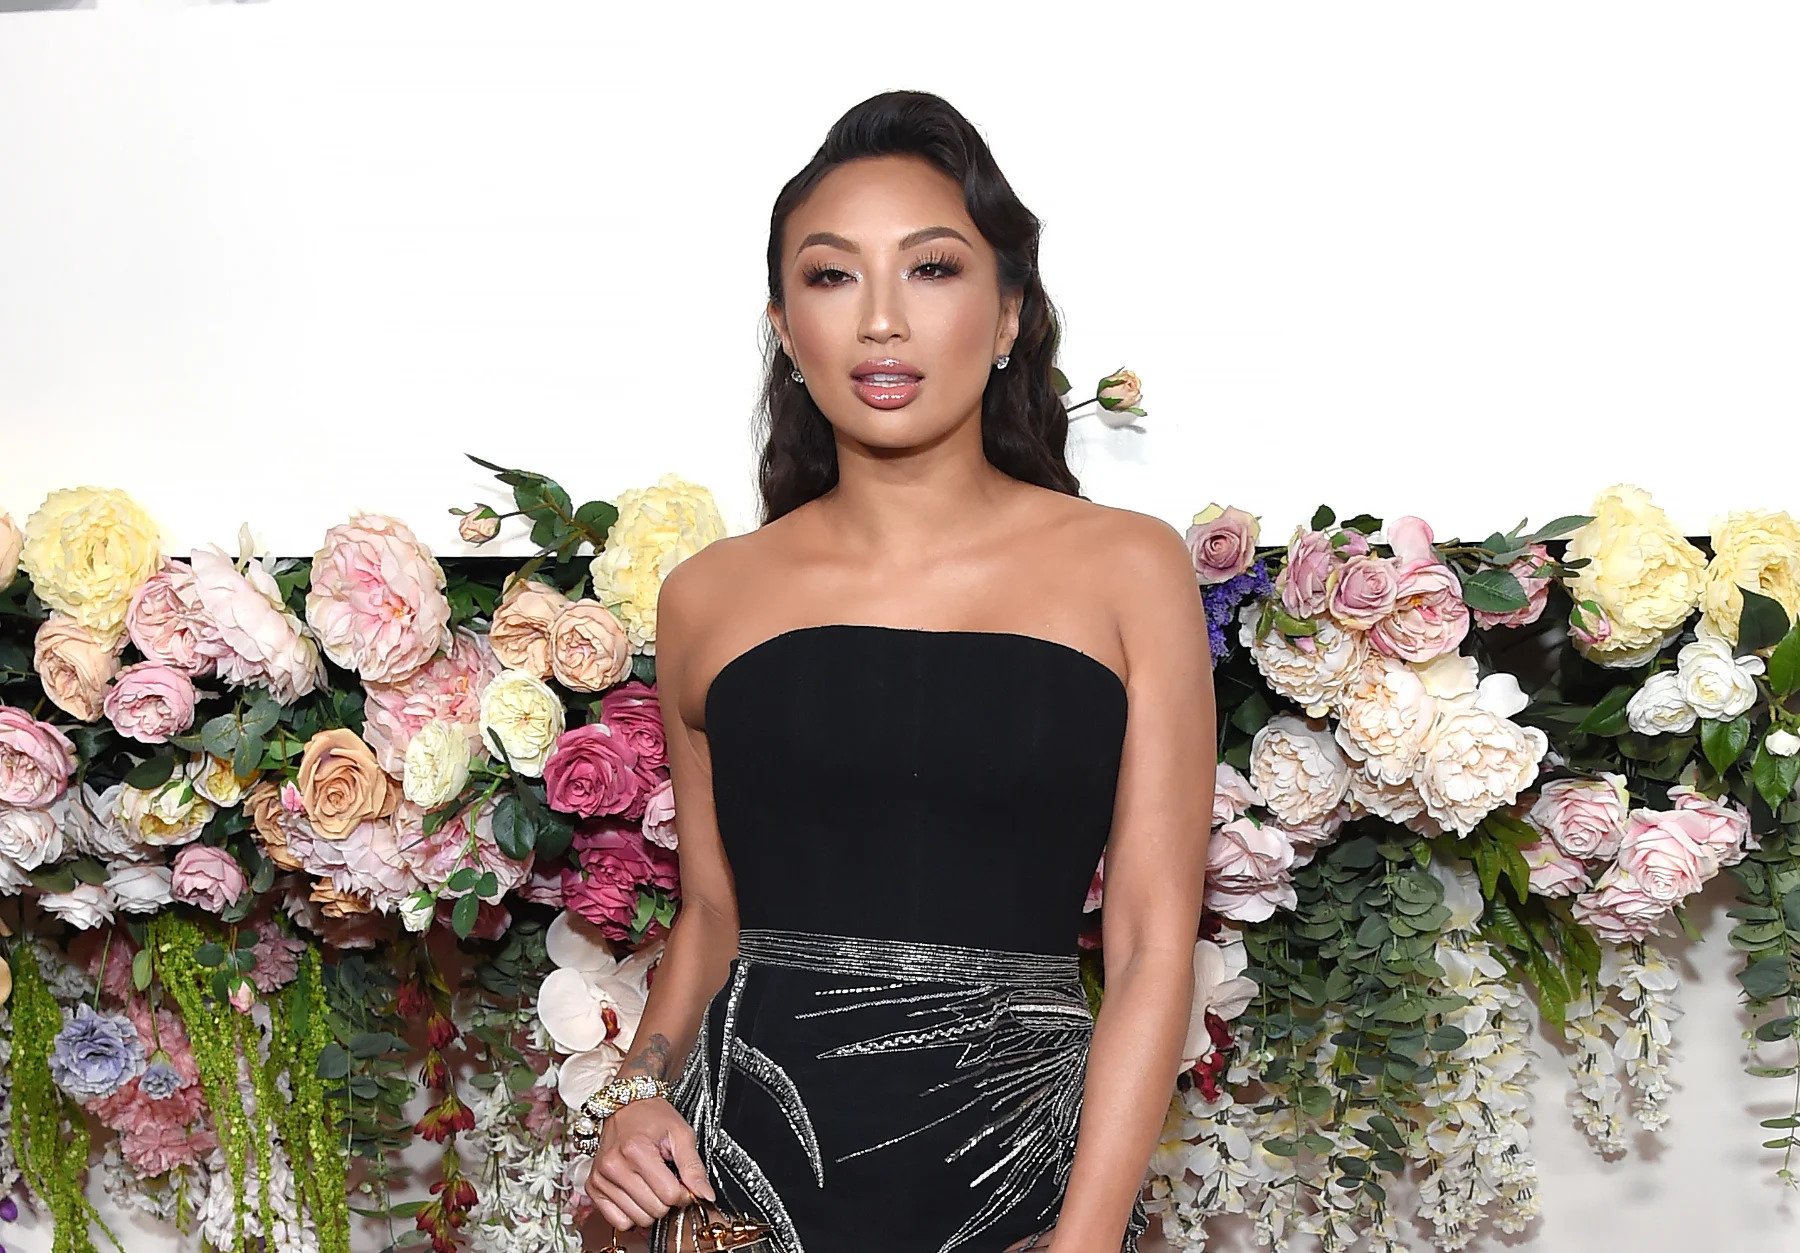 47 Facts about Jeannie Mai - Facts.net